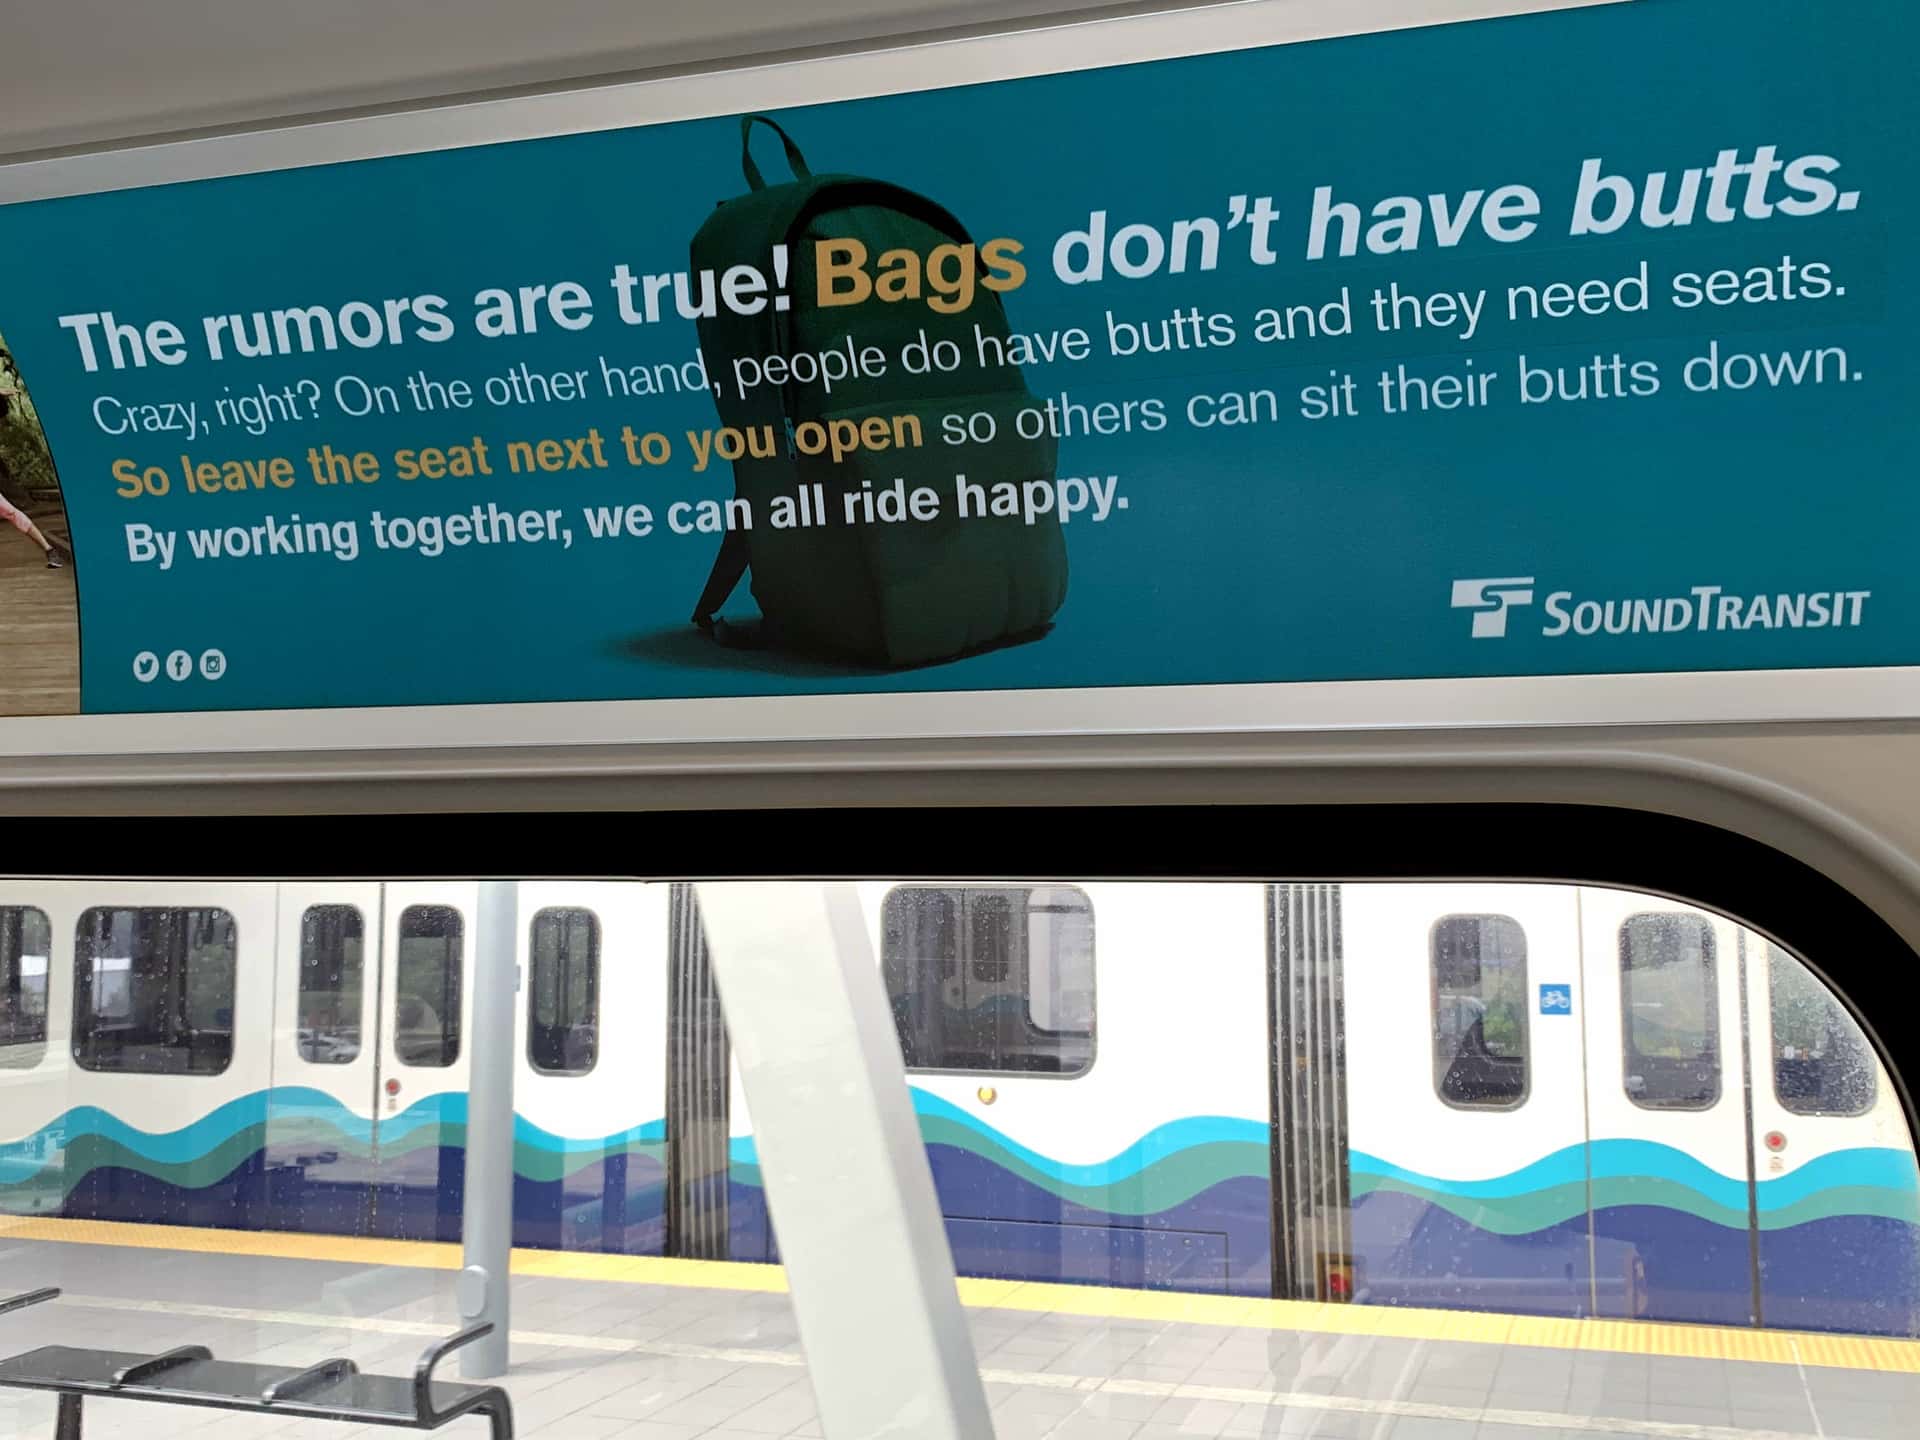 sign inside Link light rail reading “The rumors are true! Bags don’t have butts.”